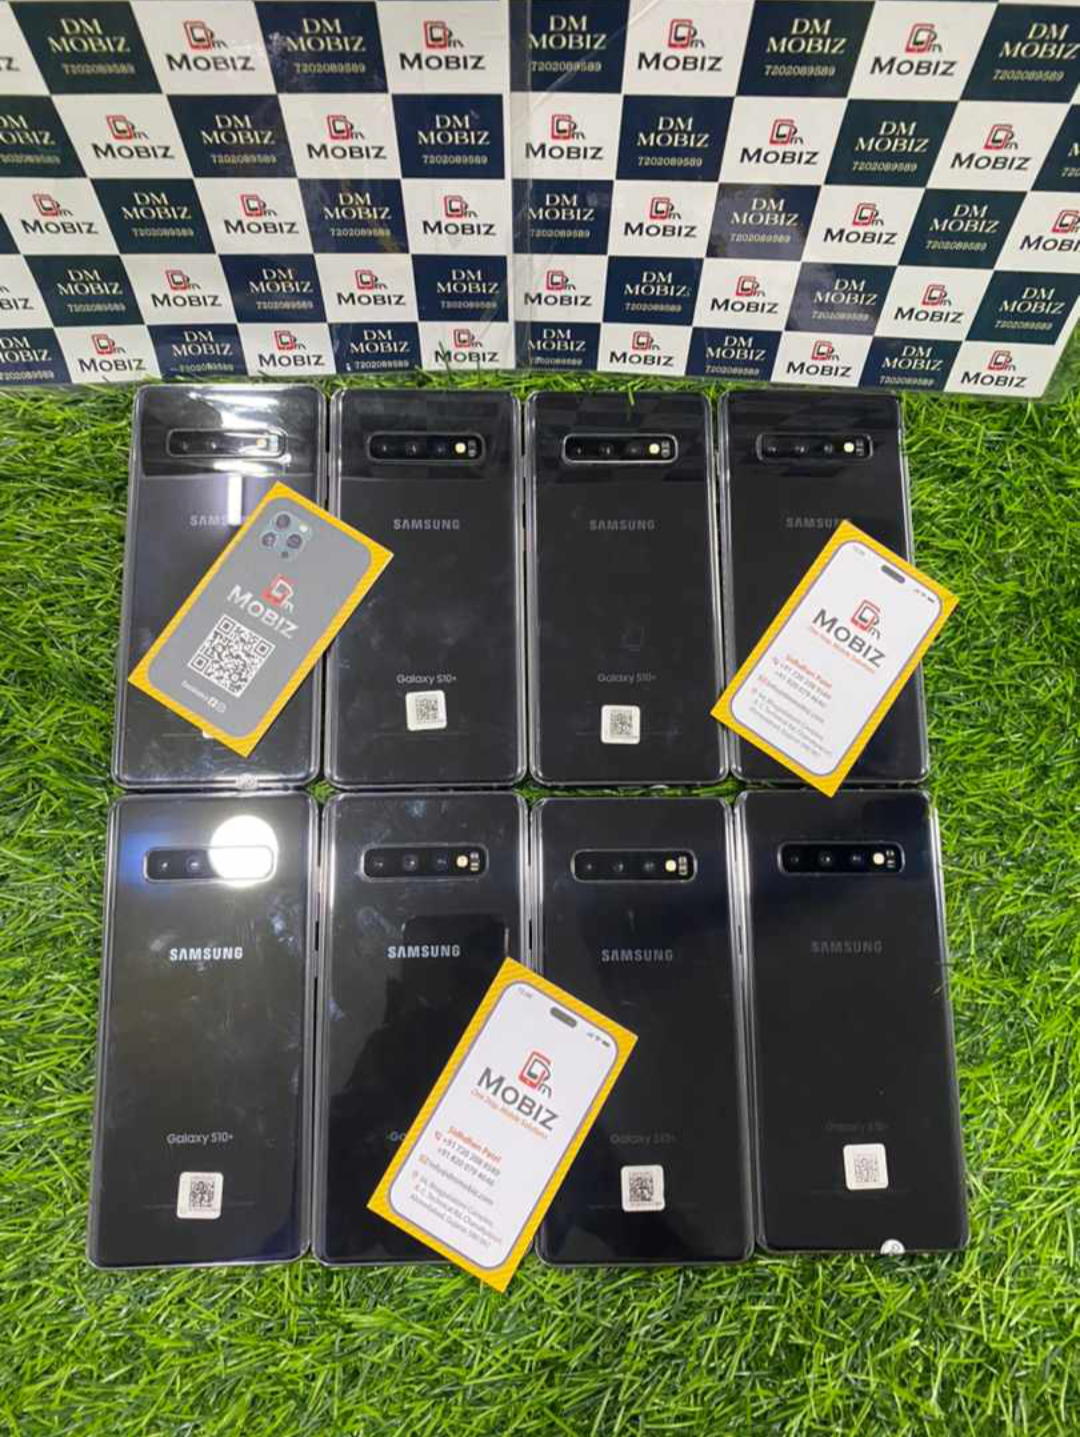 Details View - Samsung s10 plus photos - Samsung S10 Plus, 25W Charger, 8GB RAM, 128GB Storage, Full Warranty, Used Samsung S10 Plus, Old Samsung S10 Plus, Ahmedabad, Gujarat, India, Samsung, Smartphone, Innovation, Performance, Deals, Ahmedabad Shopping, Samsung Mobile, Technology, Premium Smartphone, RC Tecnical Road, Chankiyapuri, Affordable, Quality, Reliable, Best Smartphone, Ahmedabad Offers, Mobile Tech